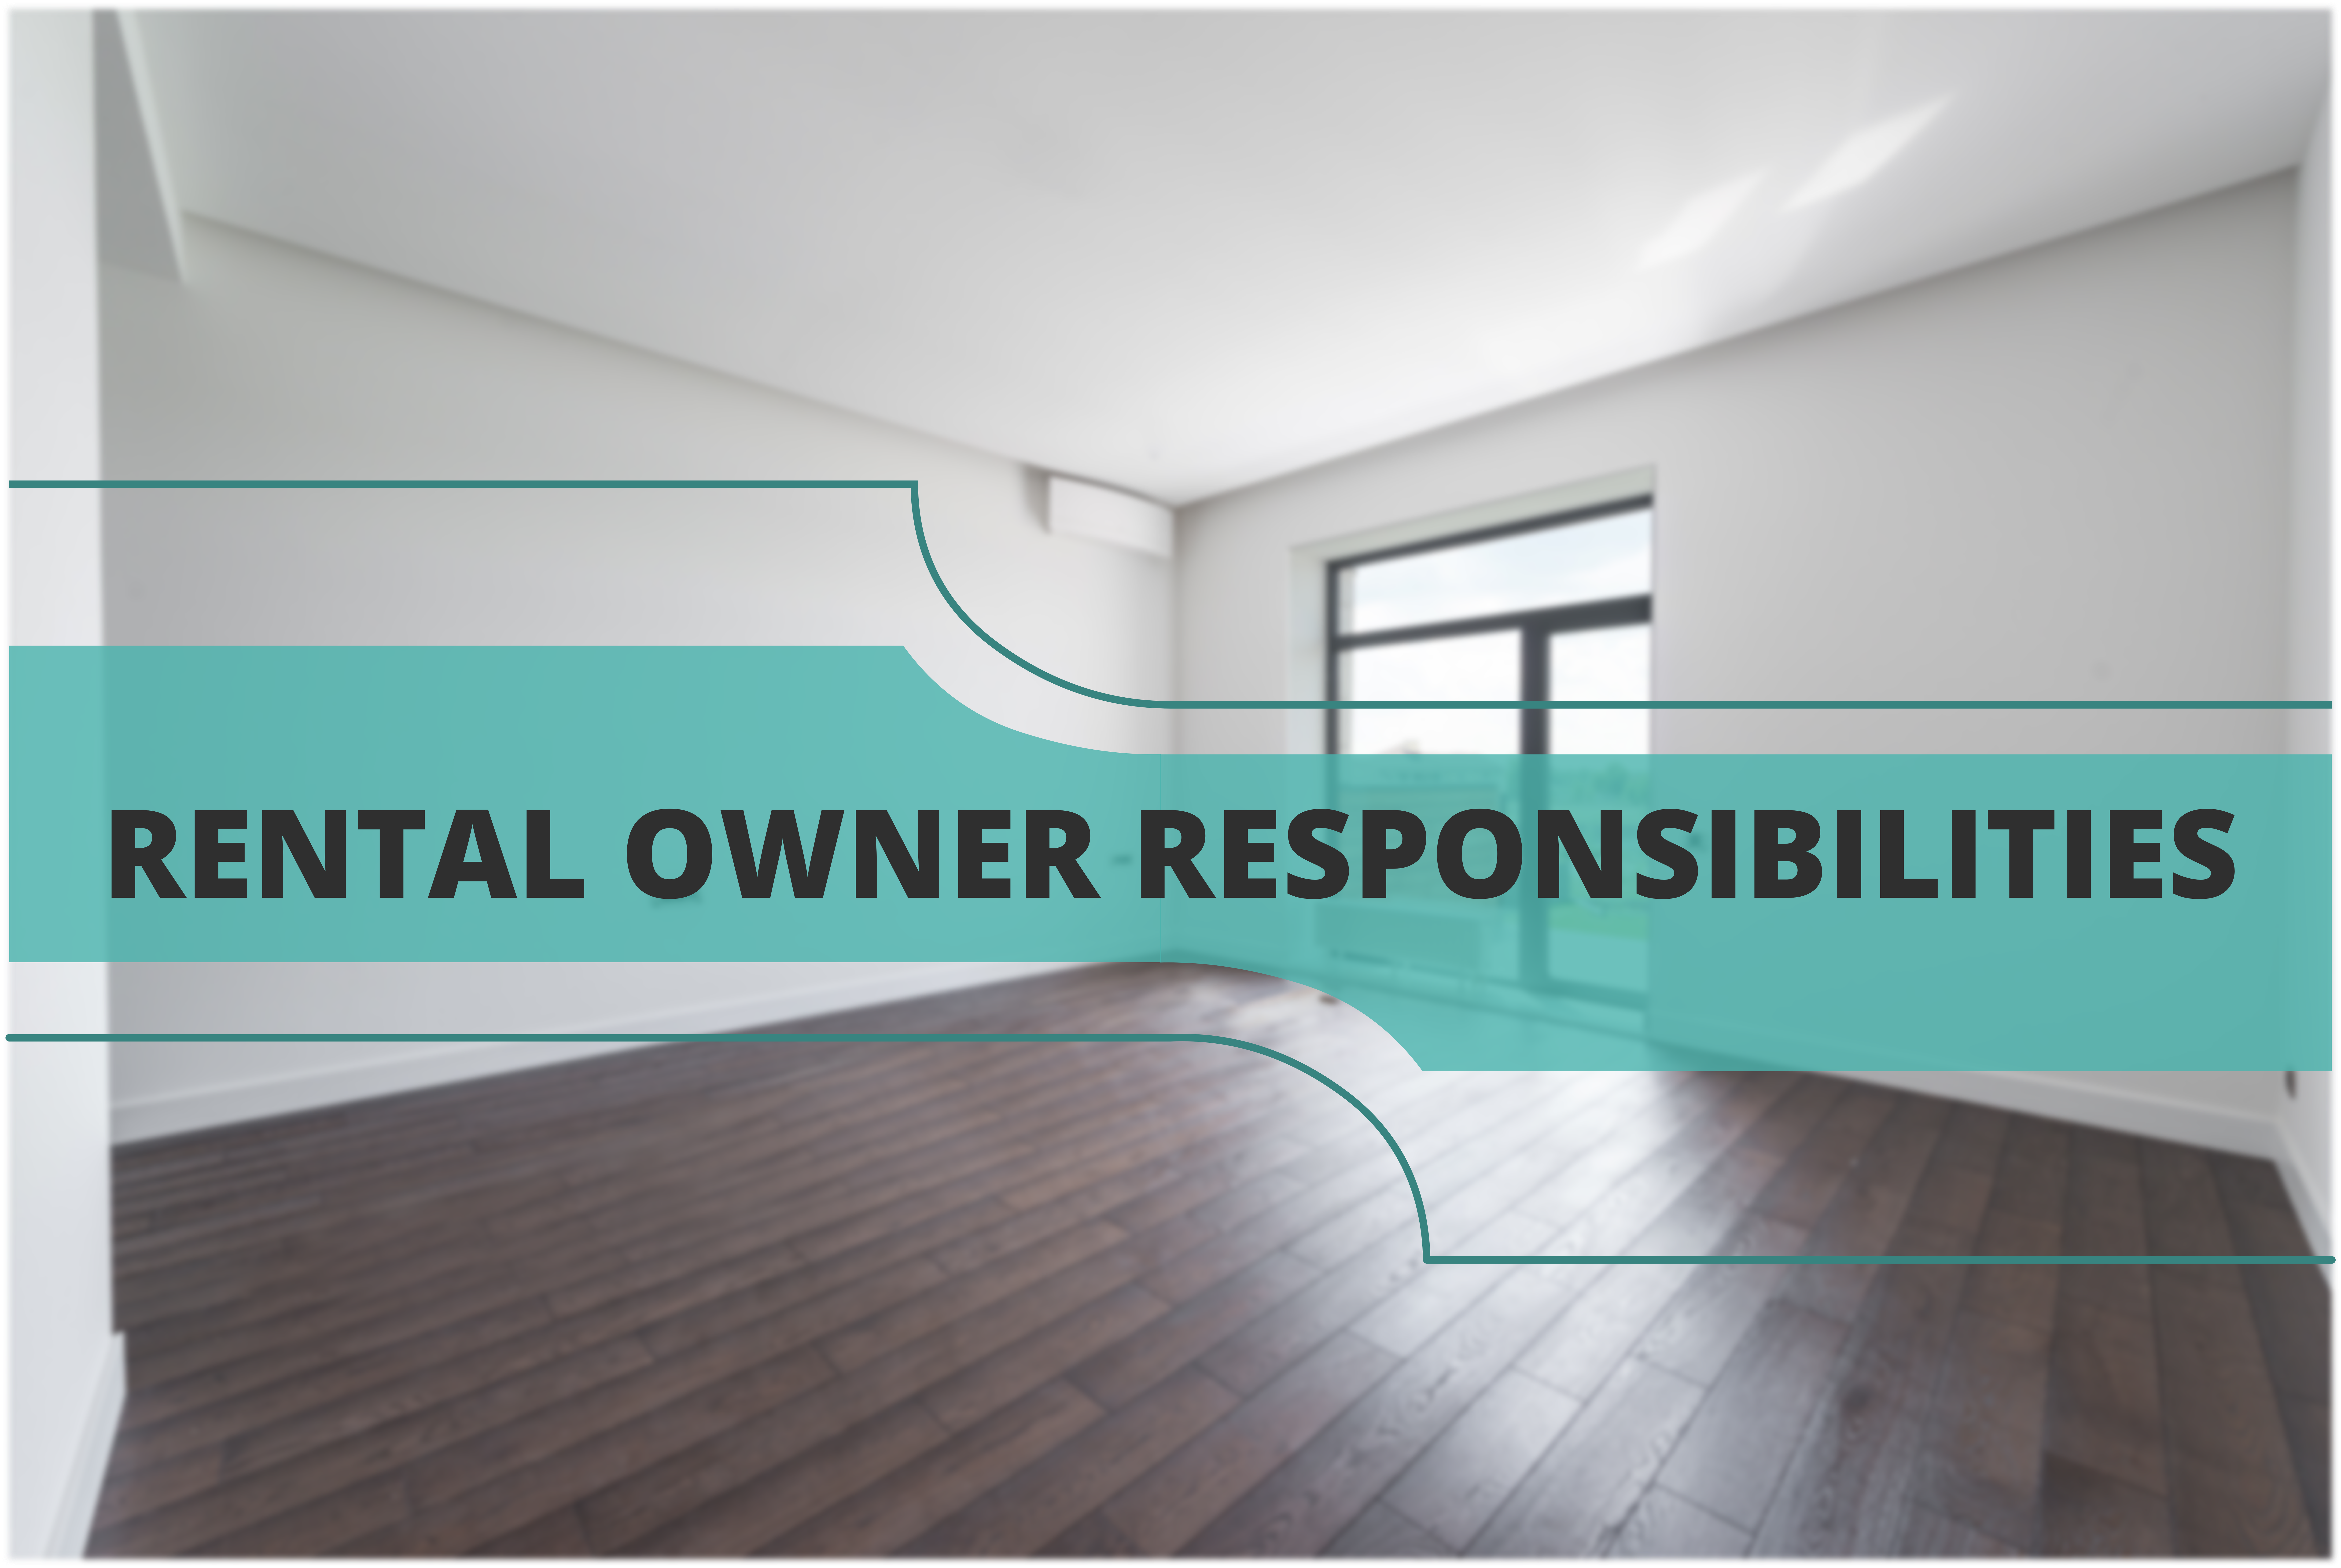 What Are Your Responsibilities As A Single Family Rental Owner?